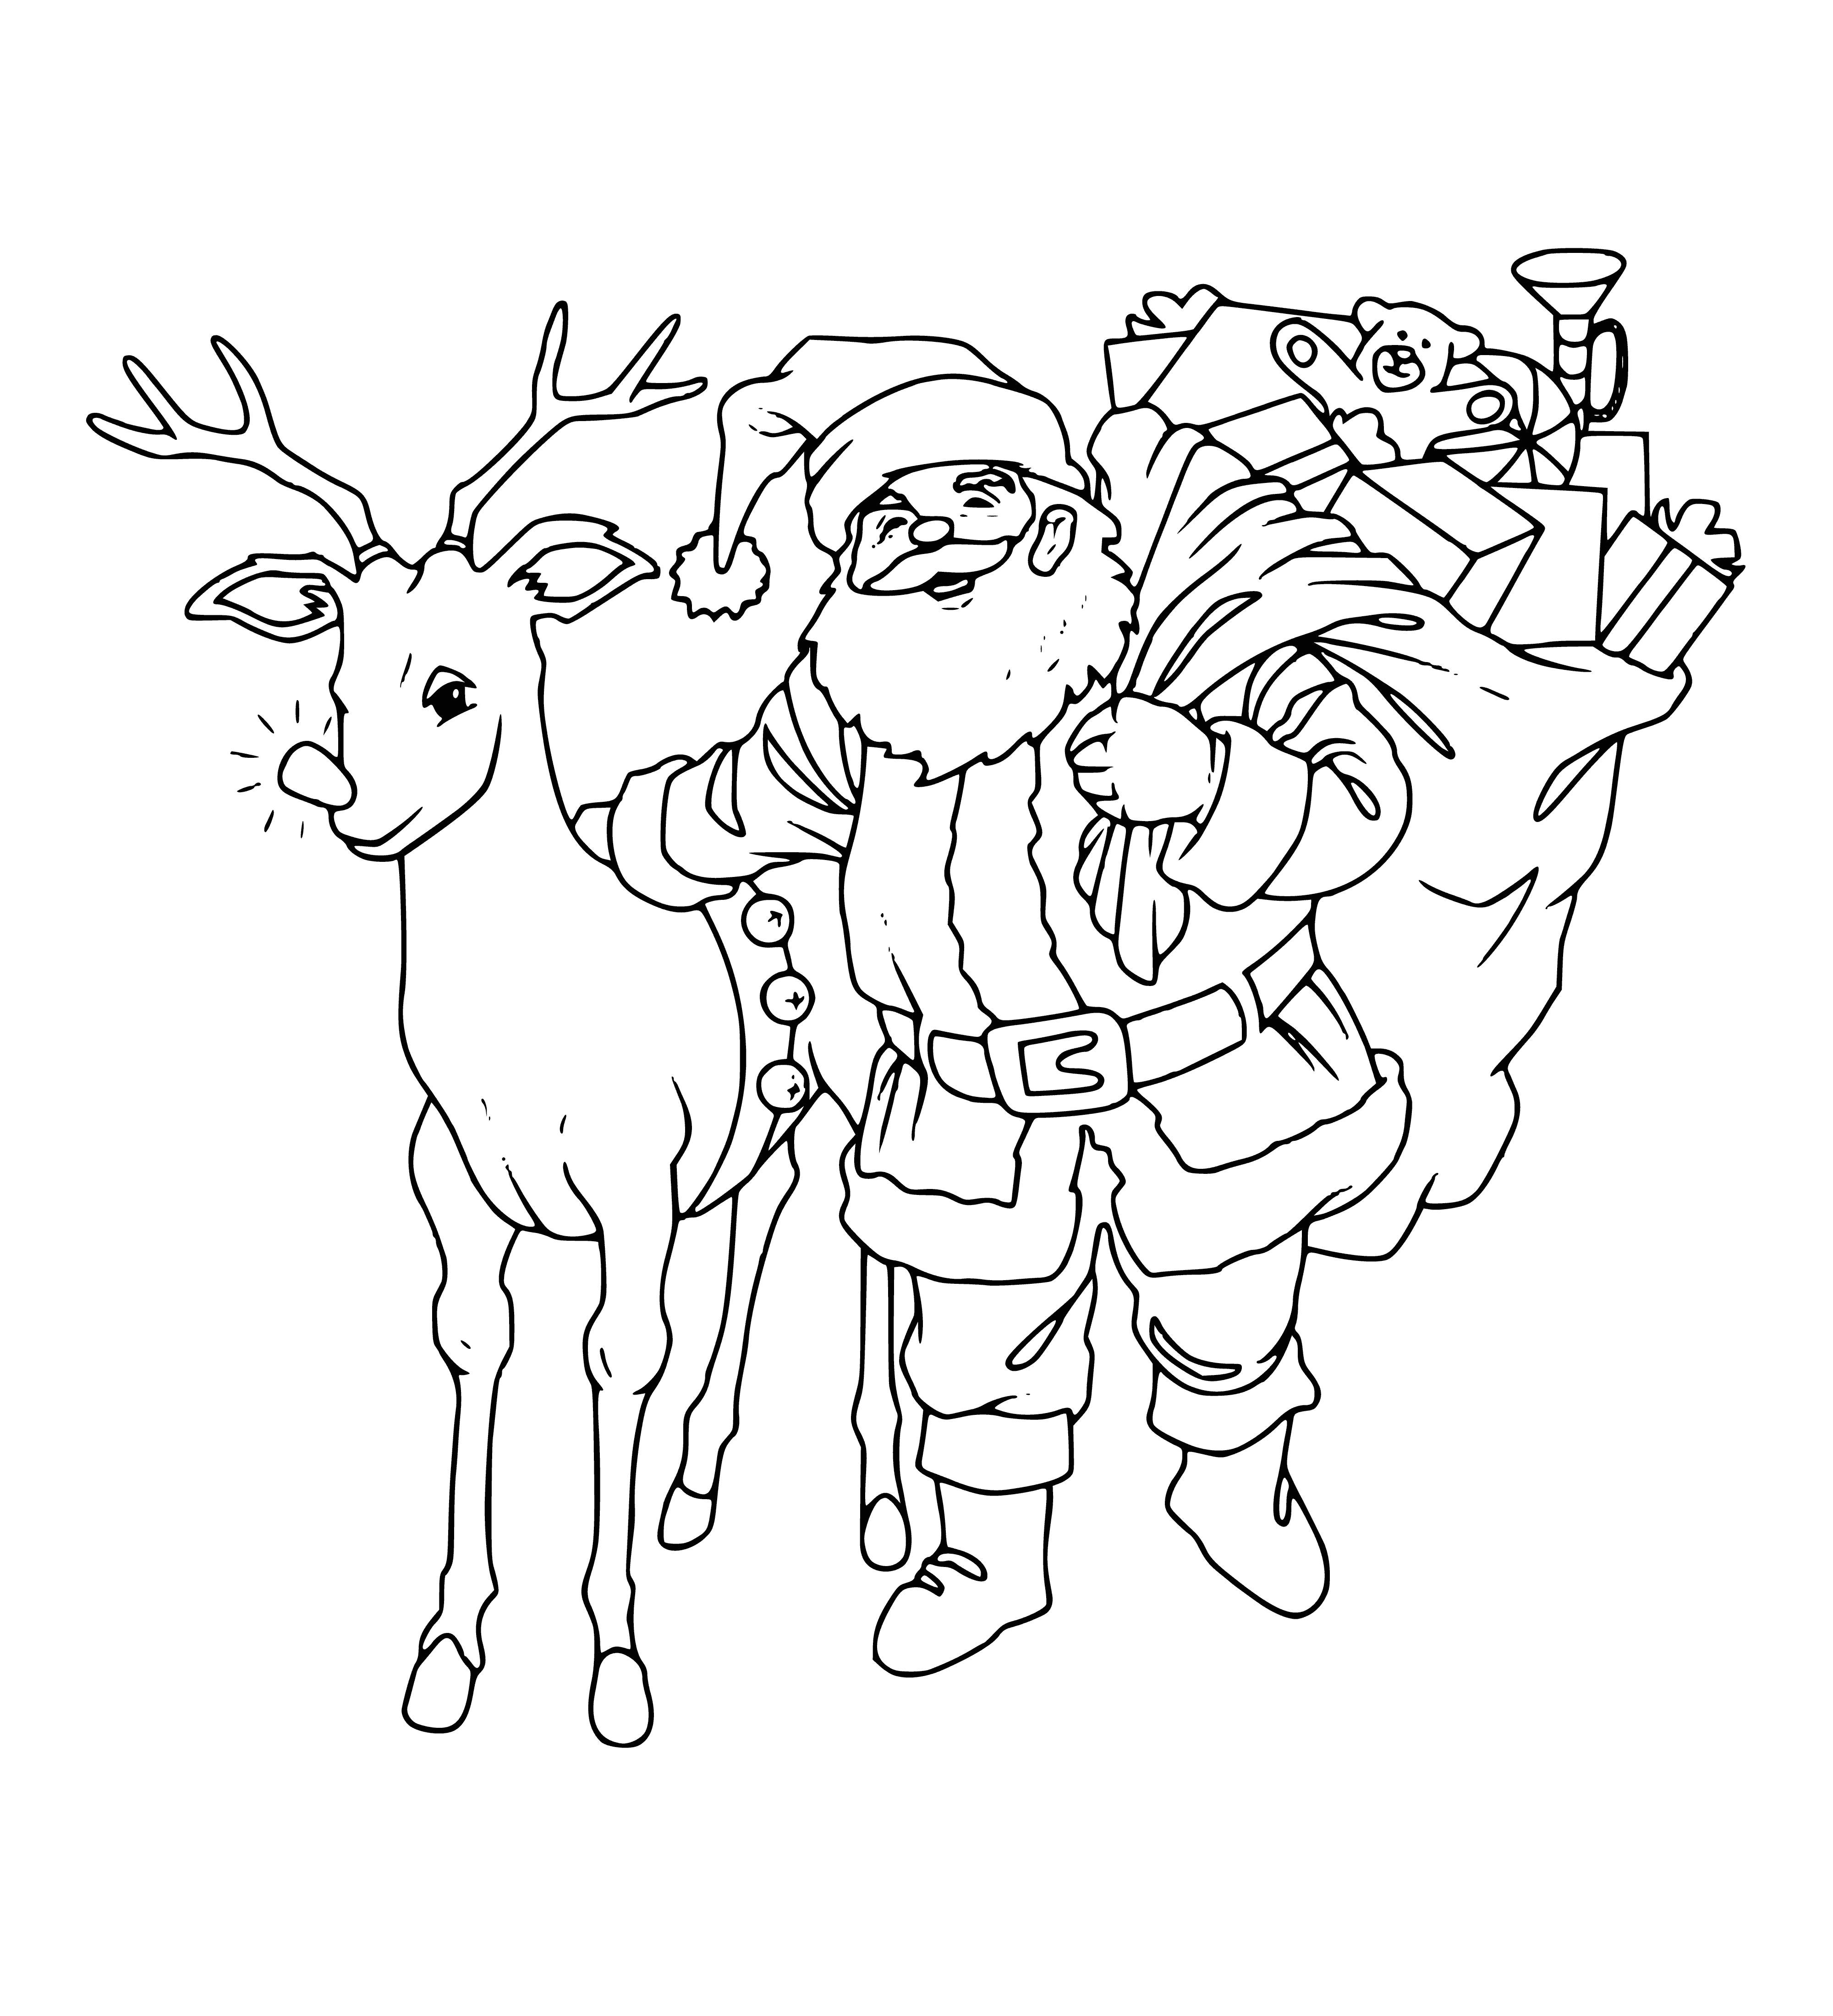 coloring page: Santa Claus is smiling with presents and lights, while Rudolph stands nearby with a red nose. #Christmas